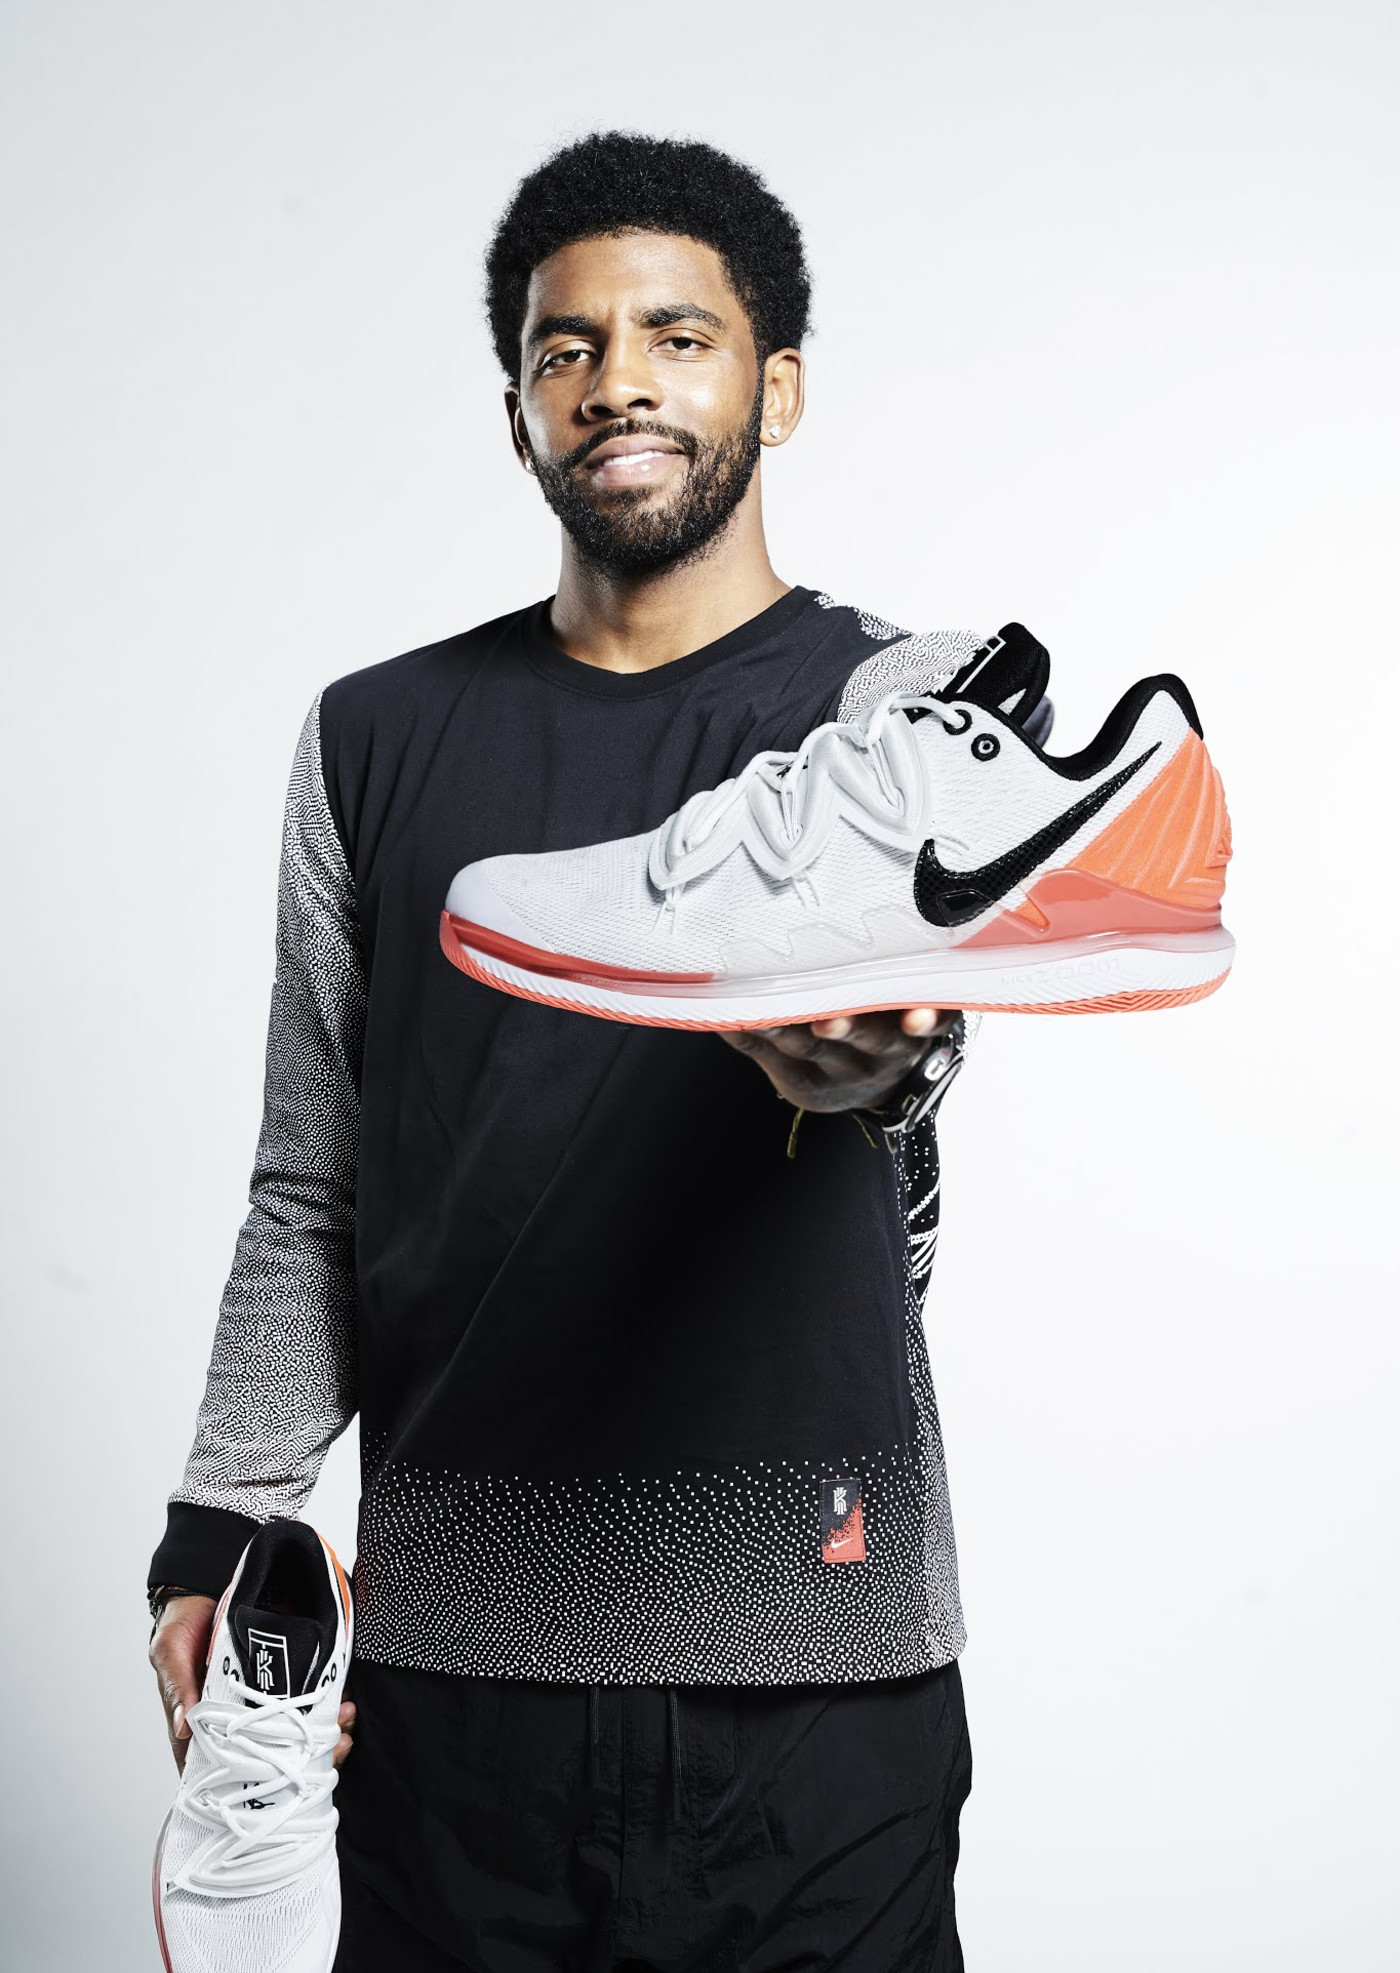 kyrie irving new nike shoes